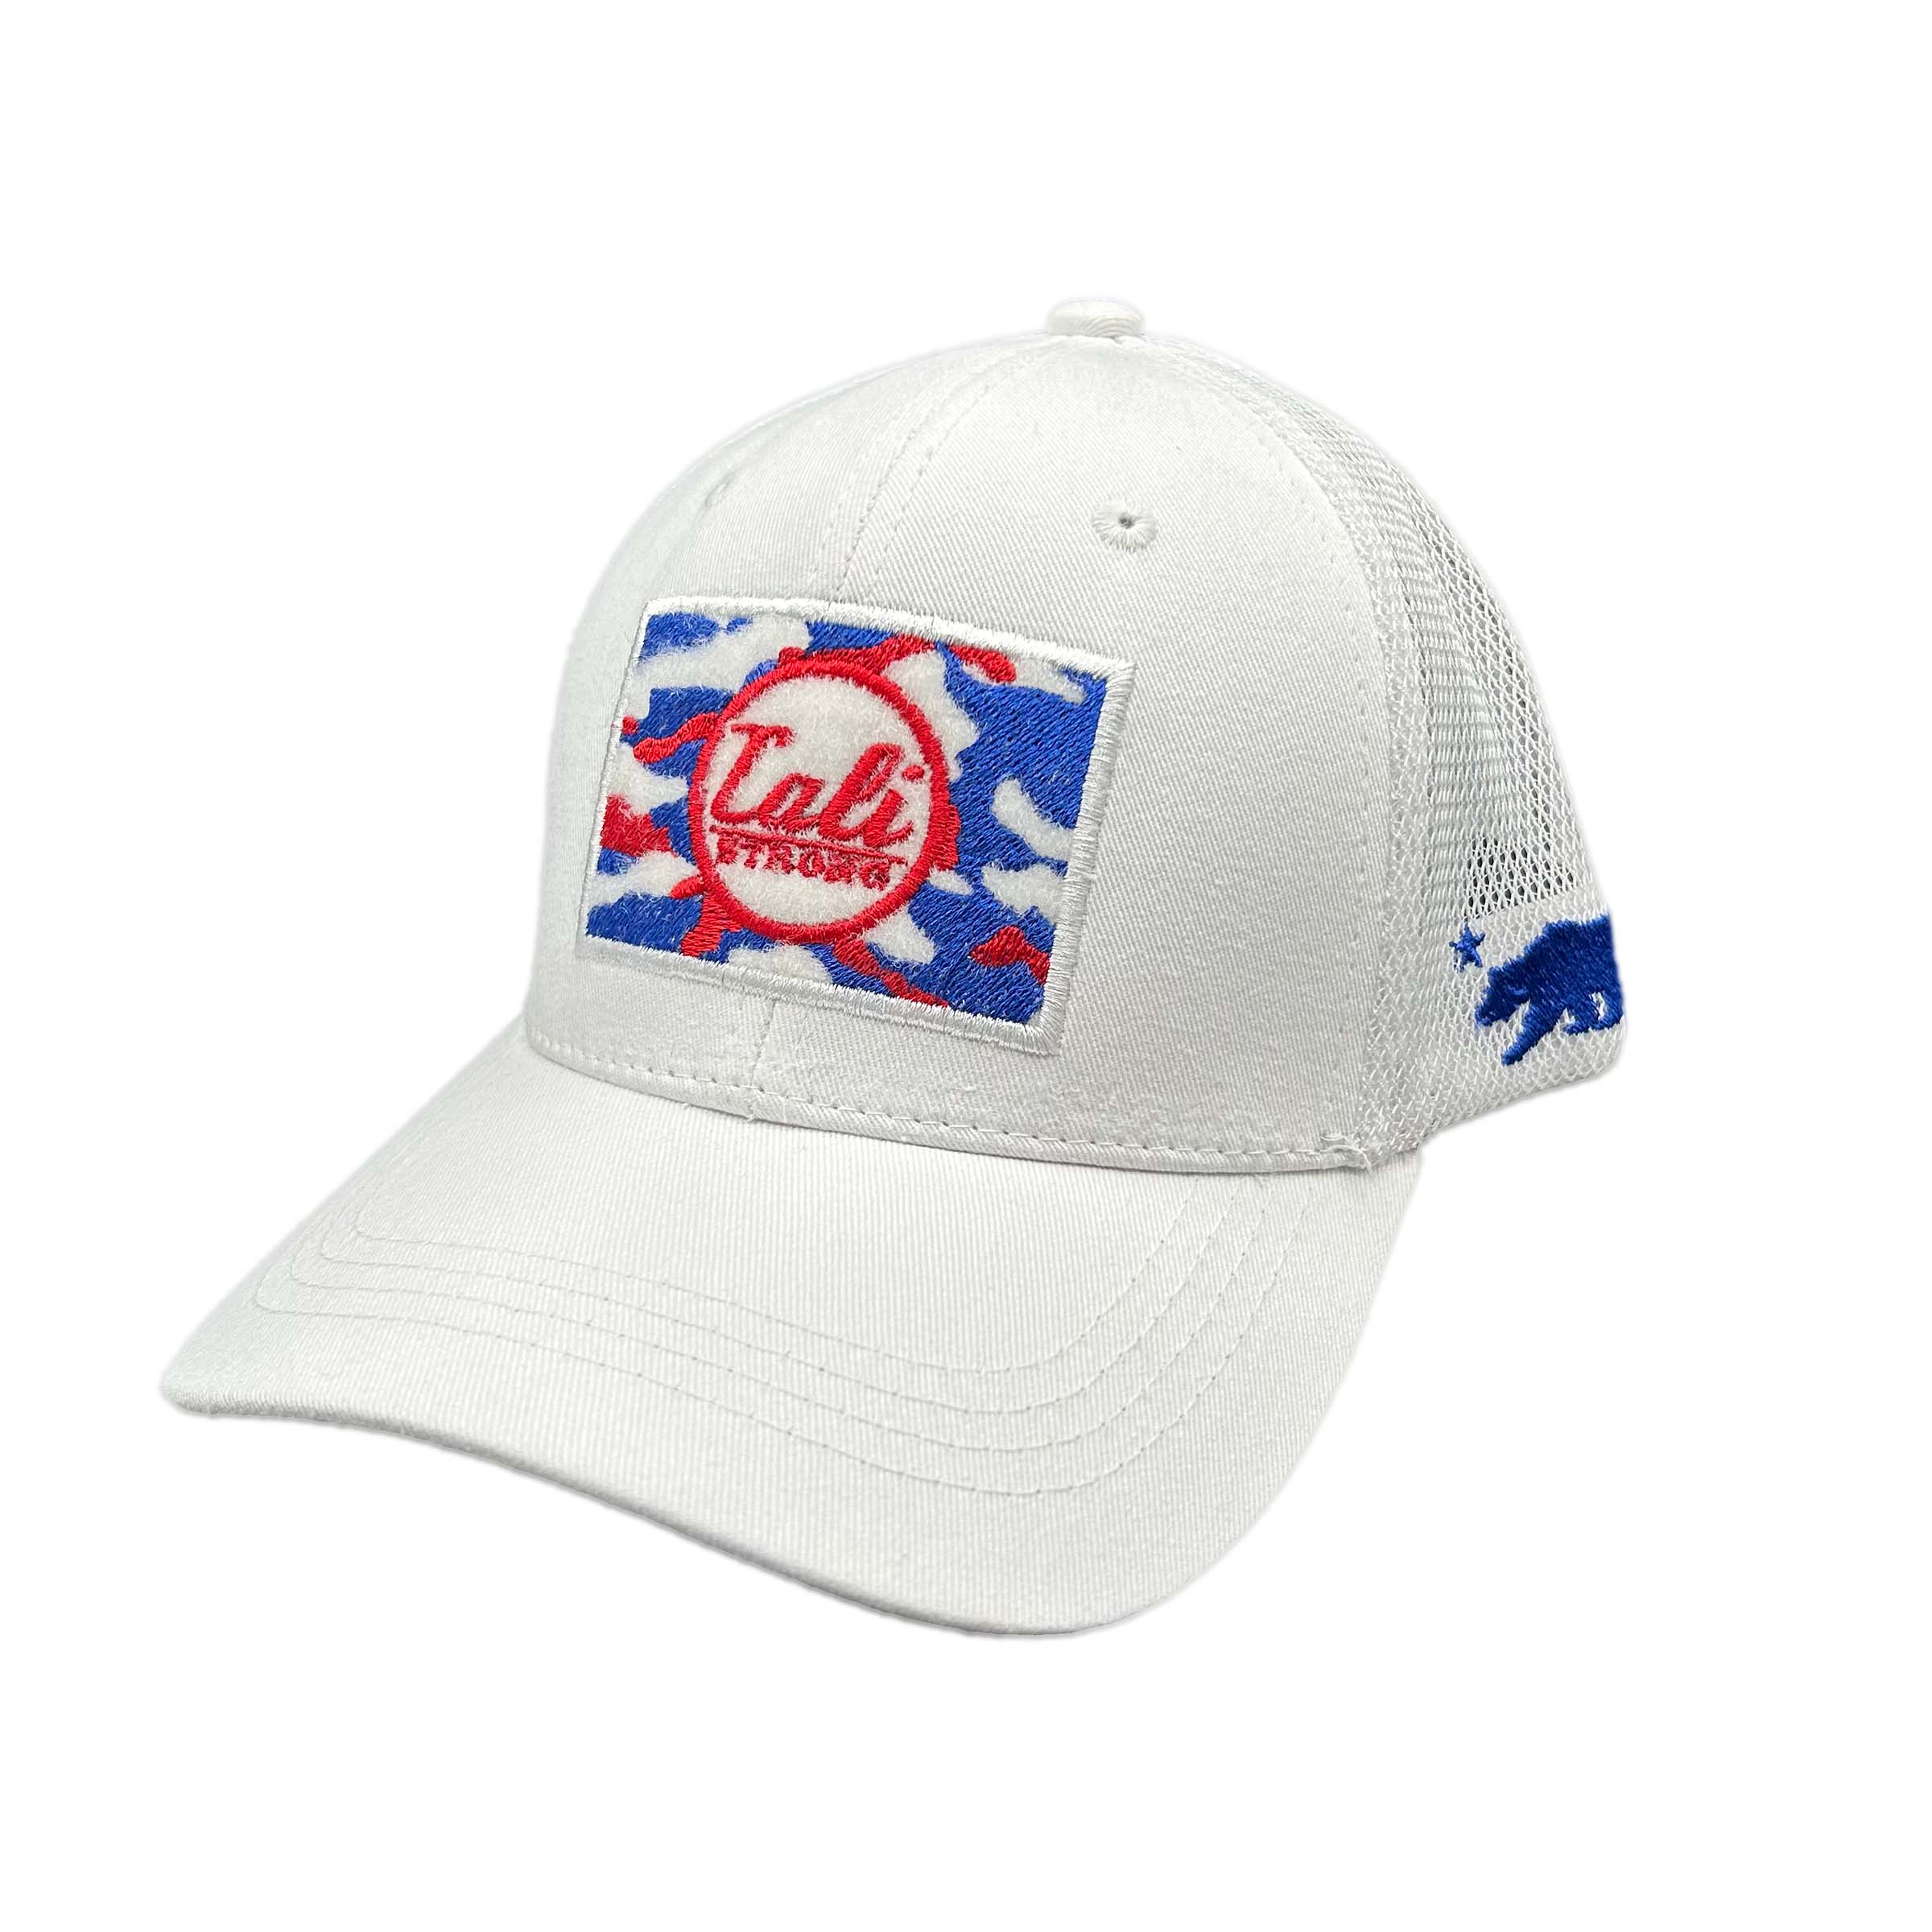 Andre Reed Foundation Tactical Trucker Hat Morale Patch White Blue - Headwear - Image 2 - CALI Strong